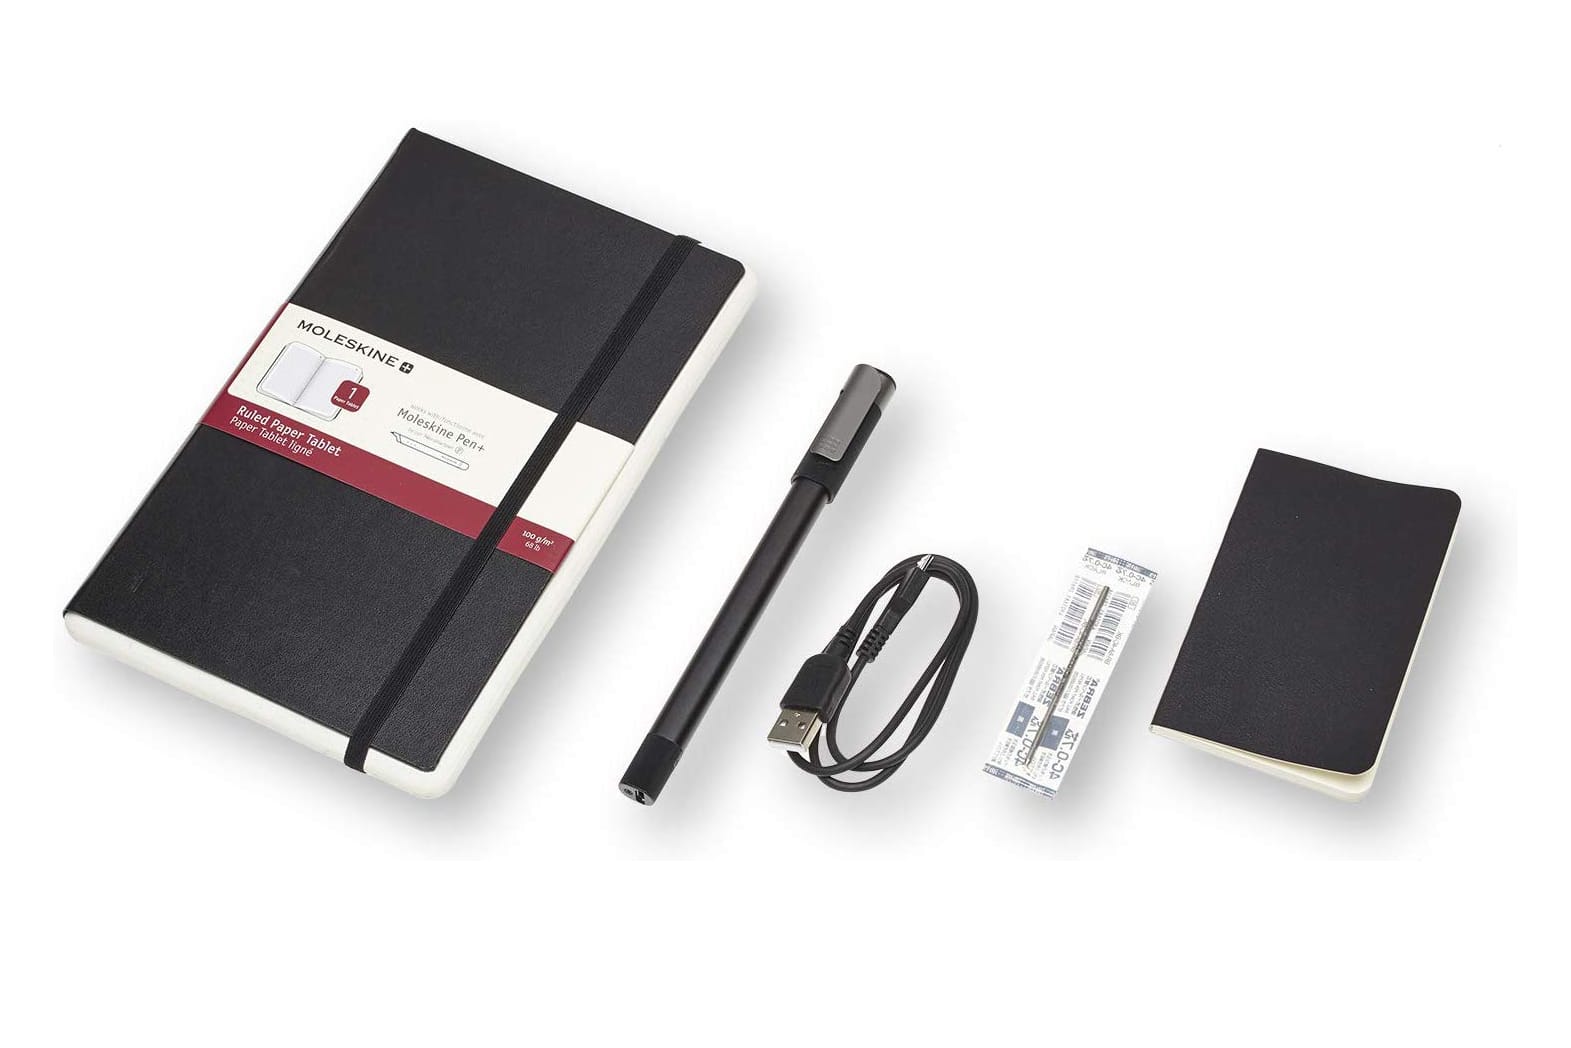 Moleskine Pen+ Ellipse Smart Writing Set Pen & Ruled Smart Notebook - Use with Moleskine Notes App for Digitally Storing Notes (Only Compatible with Moleskine Smart Notebooks)